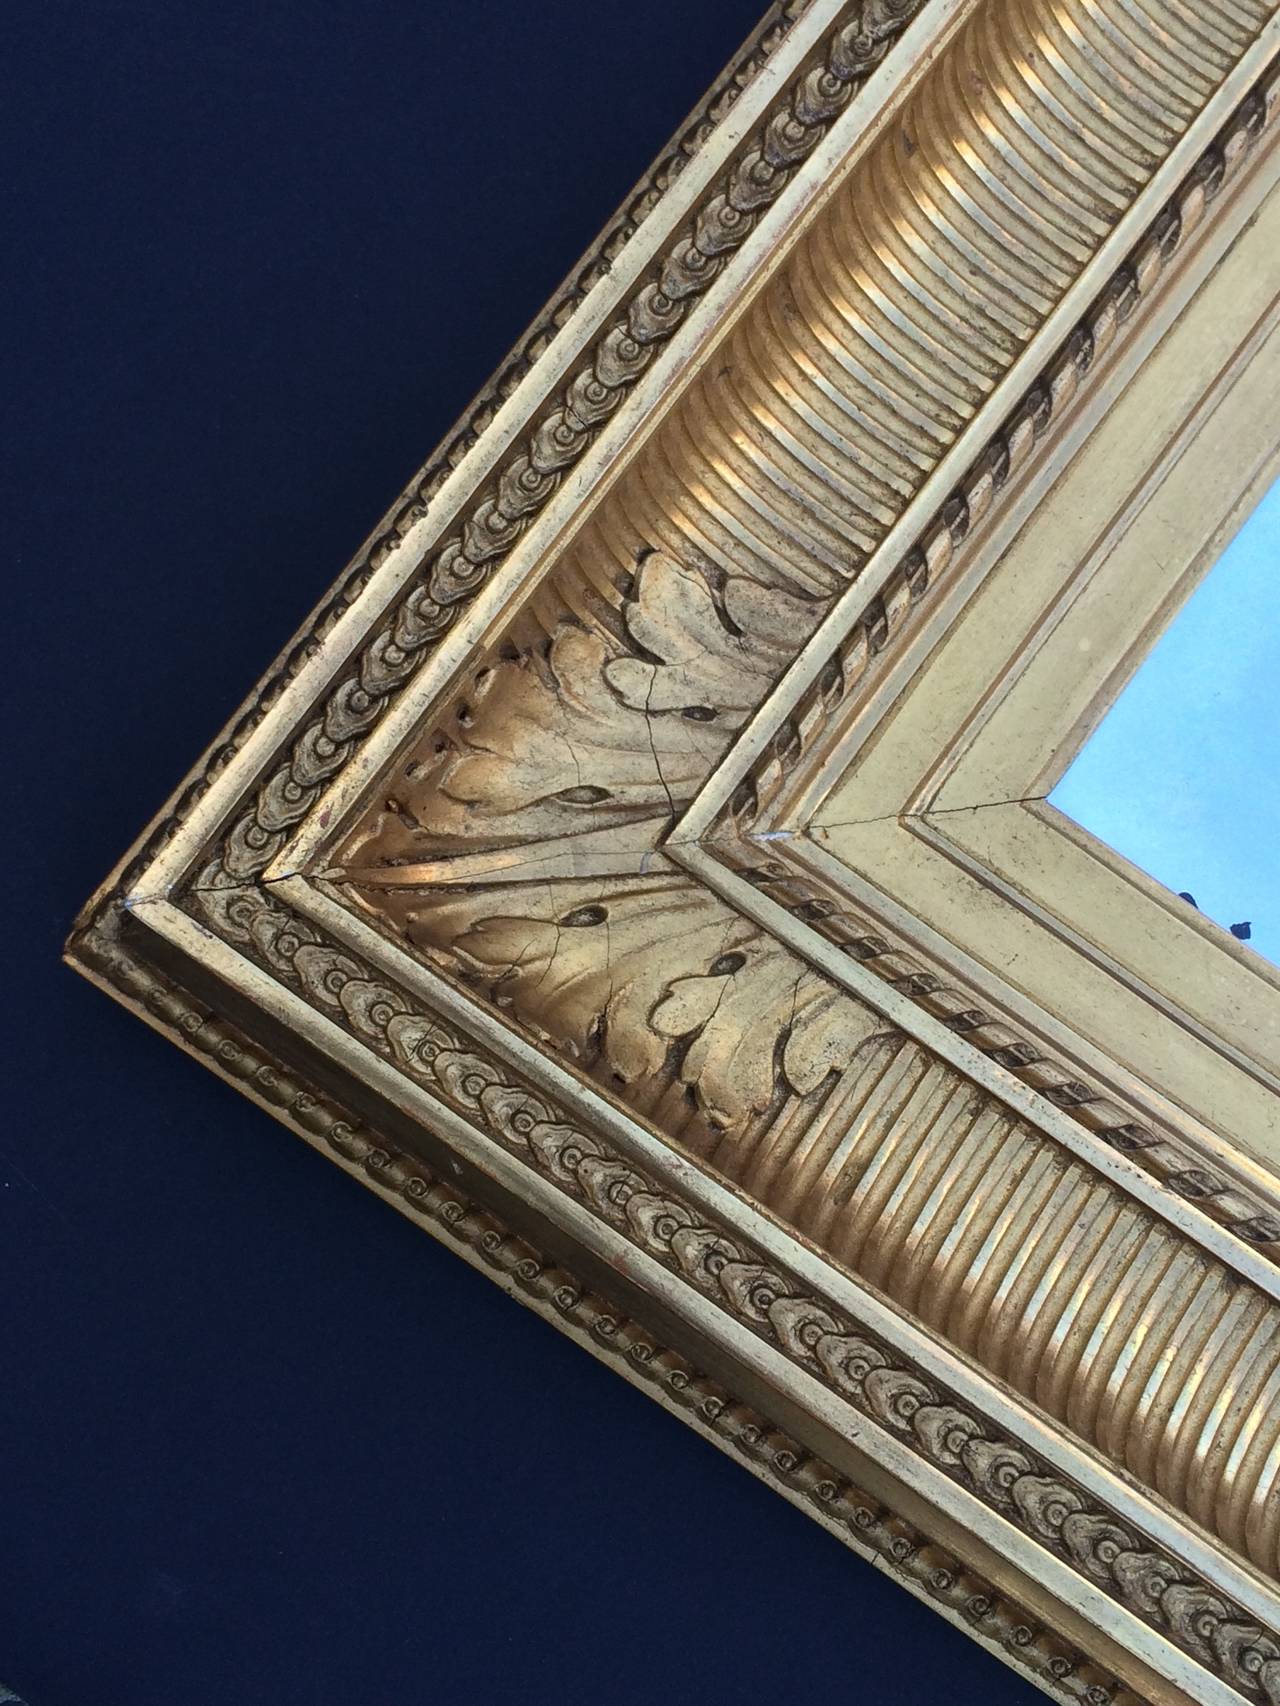 Second Empire Frame with Mirror
1850-1870
France
Carved, gessoed, gilded and beveled wood, antique glass
17.5 x 15.75 x 2.5 inches
Illegible stamp en verso with Framemaker's name and address in Paris
Good condition, chips and minor losses